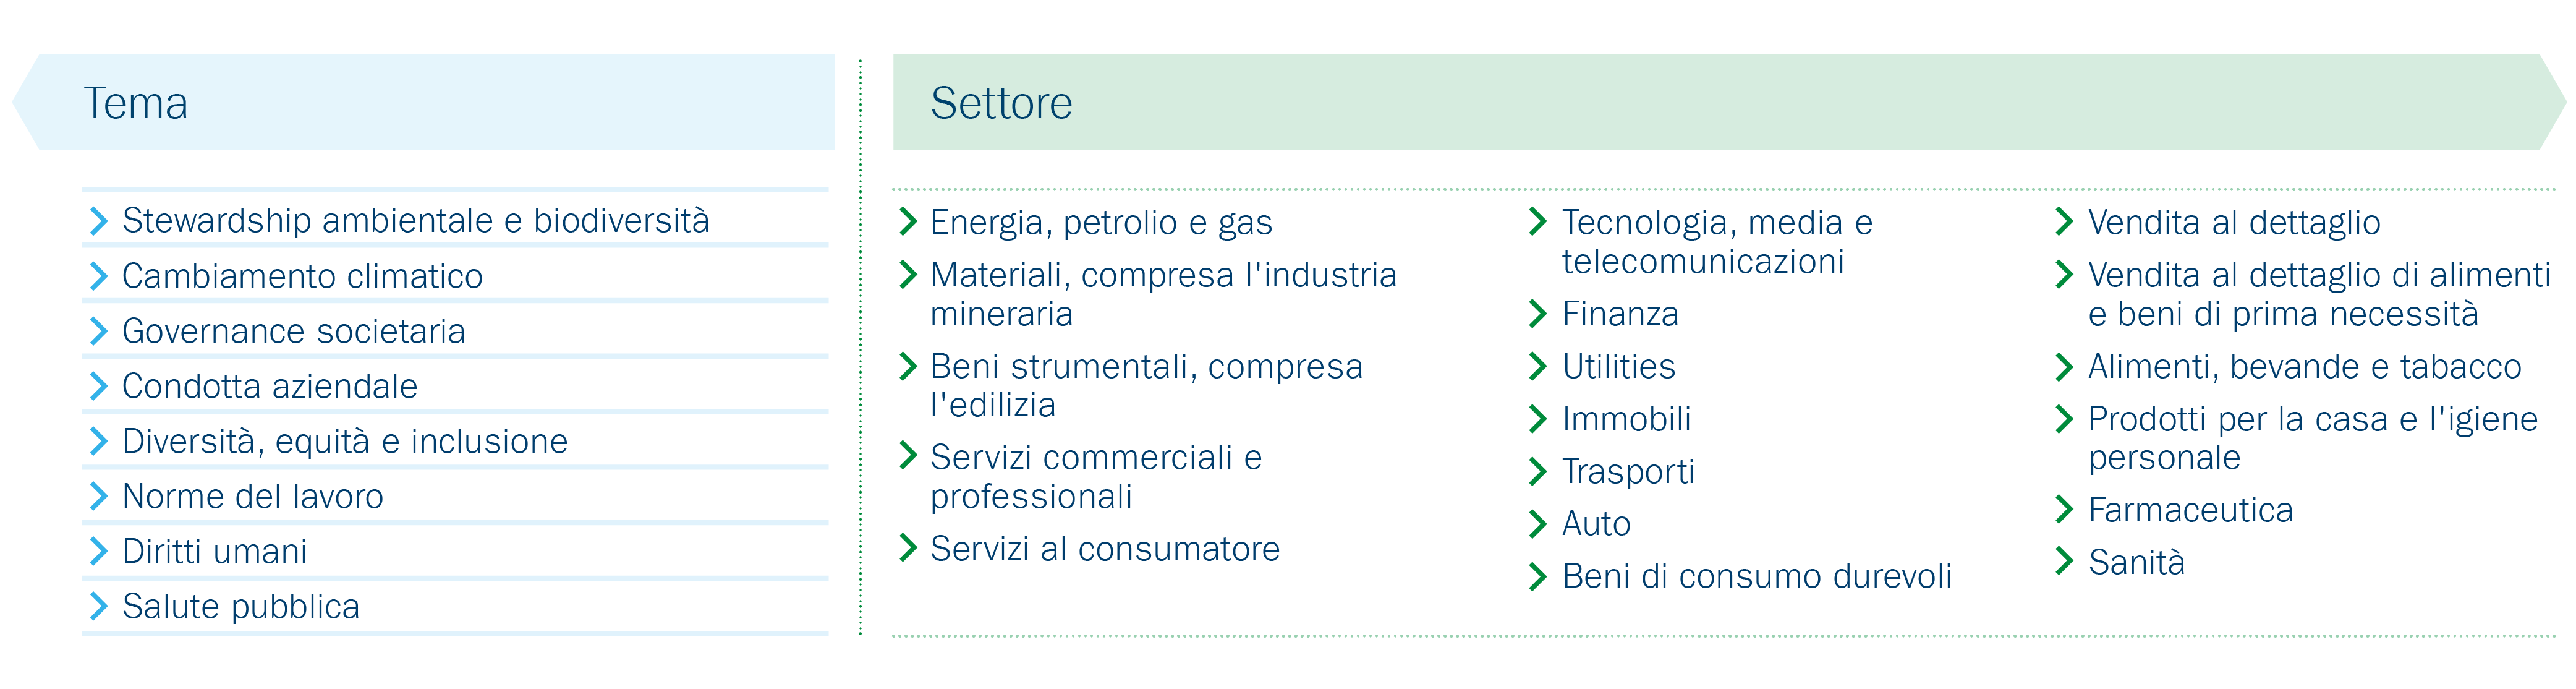 Table with a wide range of sectors and industries